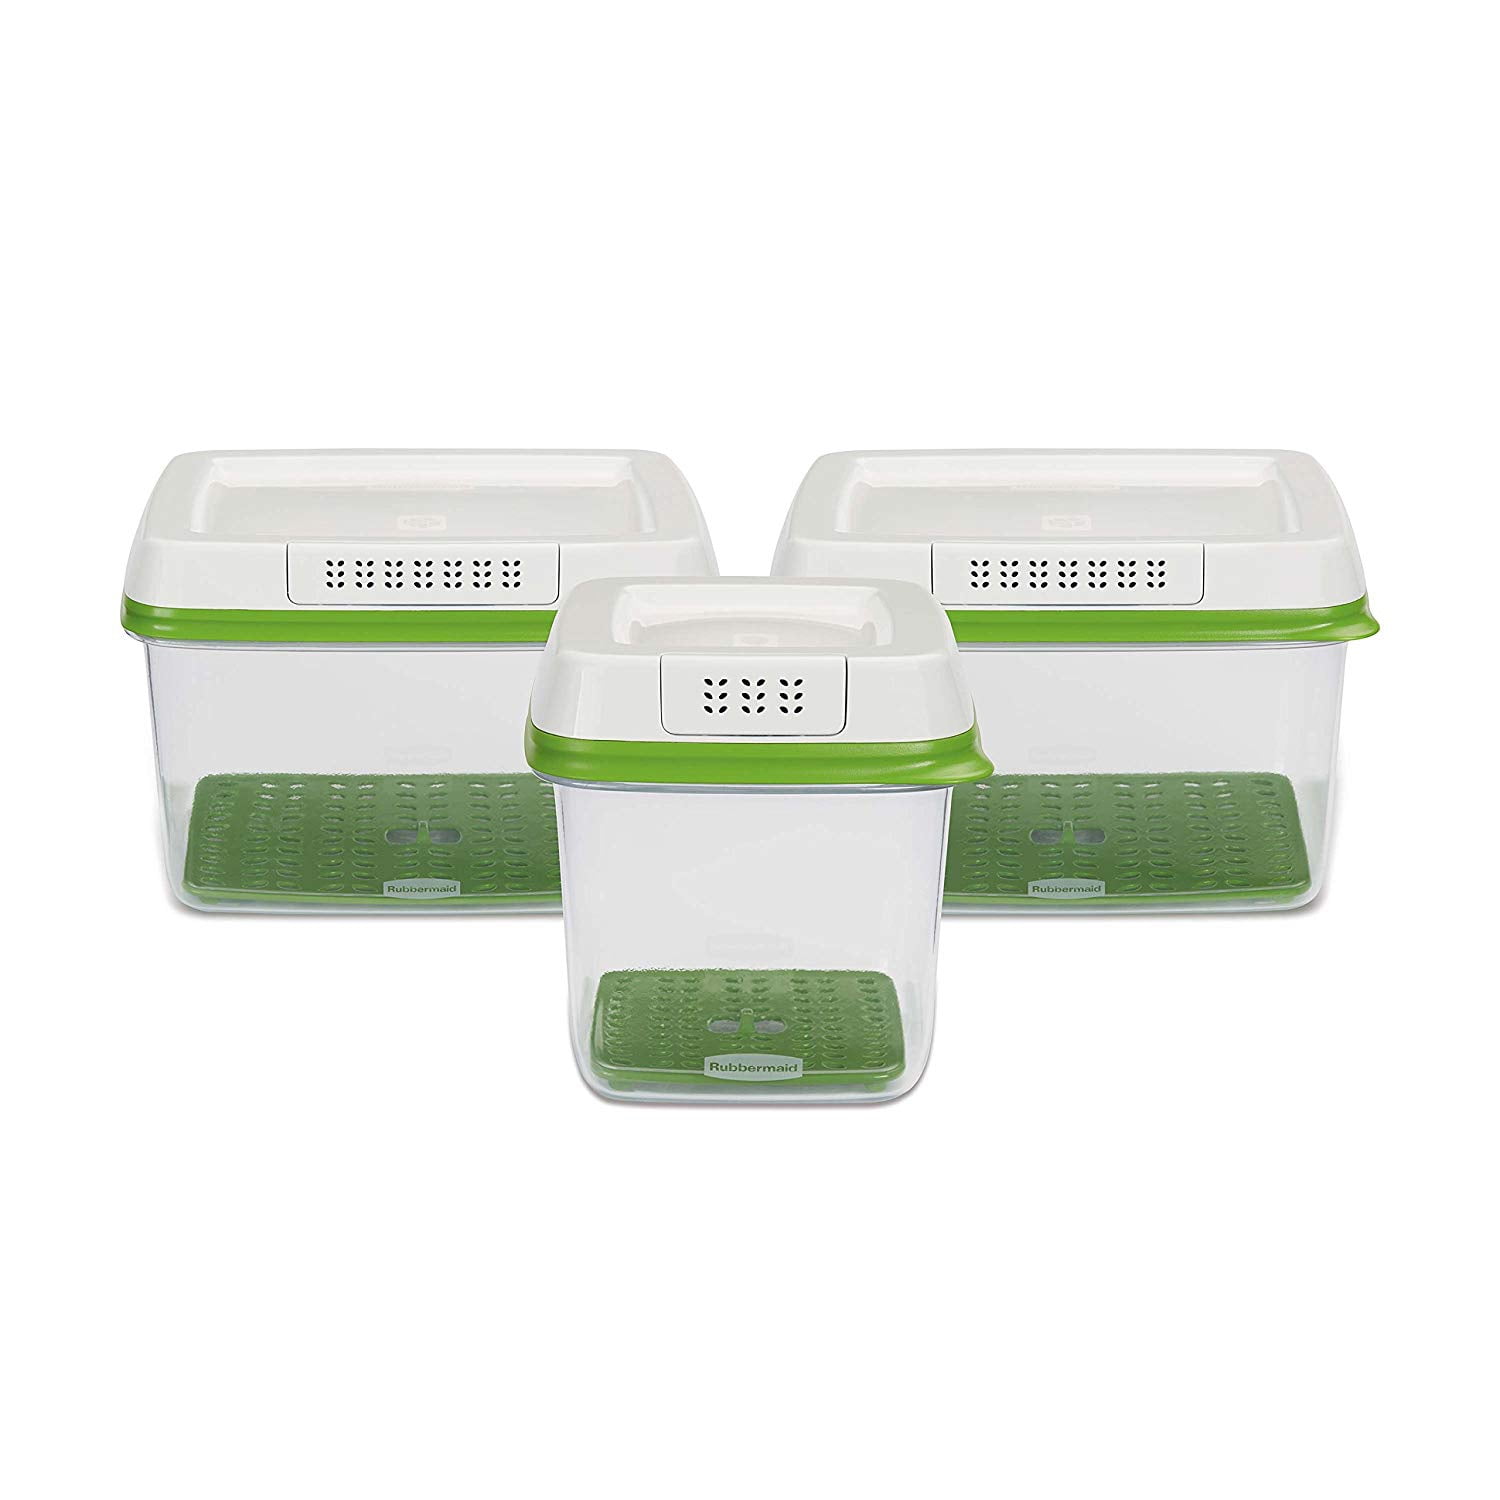  Rubbermaid 3-Piece Produce Saver Containers for